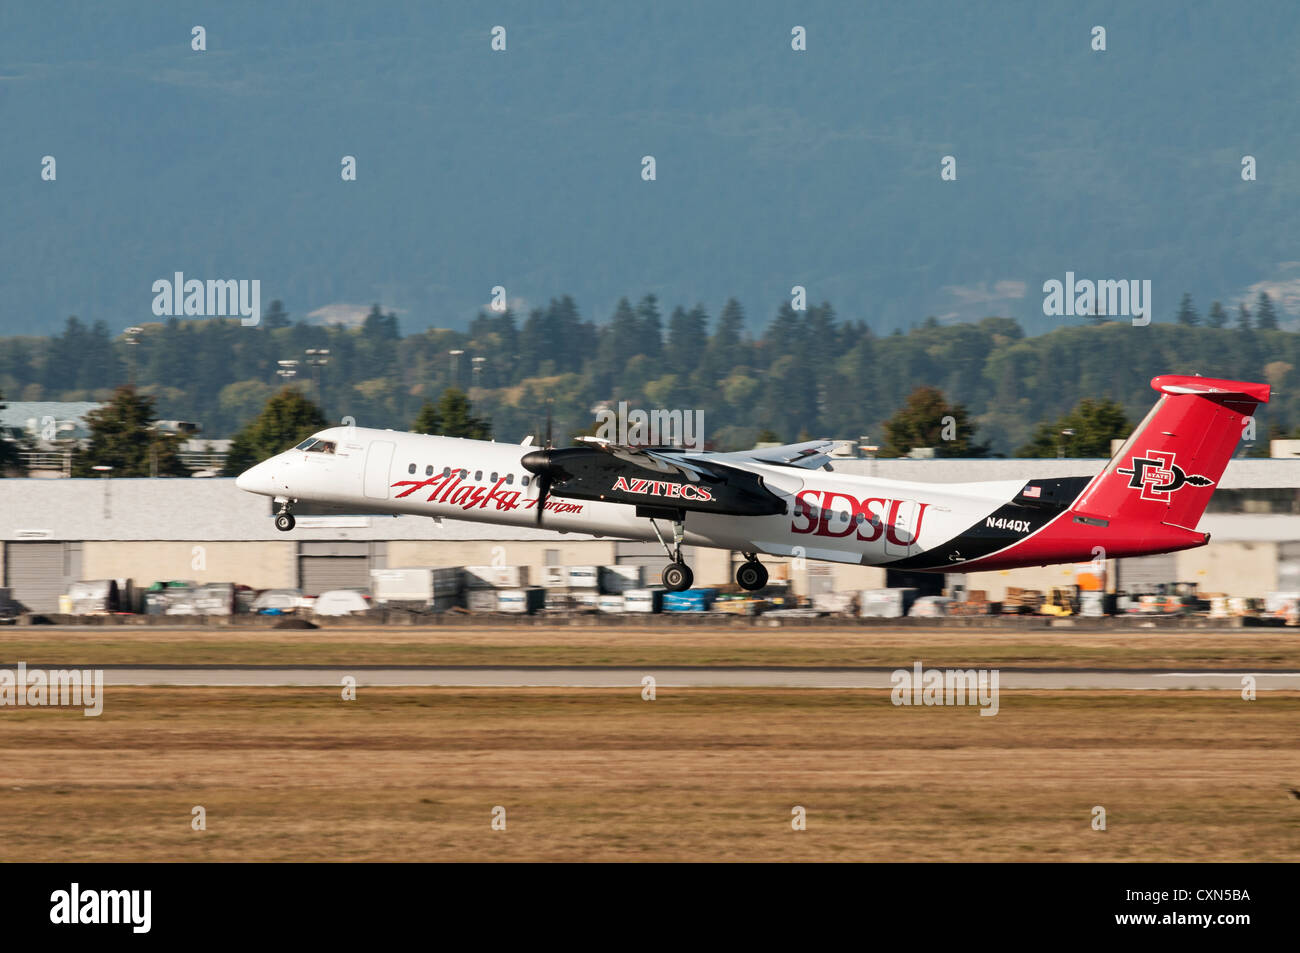 An  Alaska Airlines (Horizon Air) Bombardier Q400 in special San Diego State University Aztecs livery takes off Stock Photo